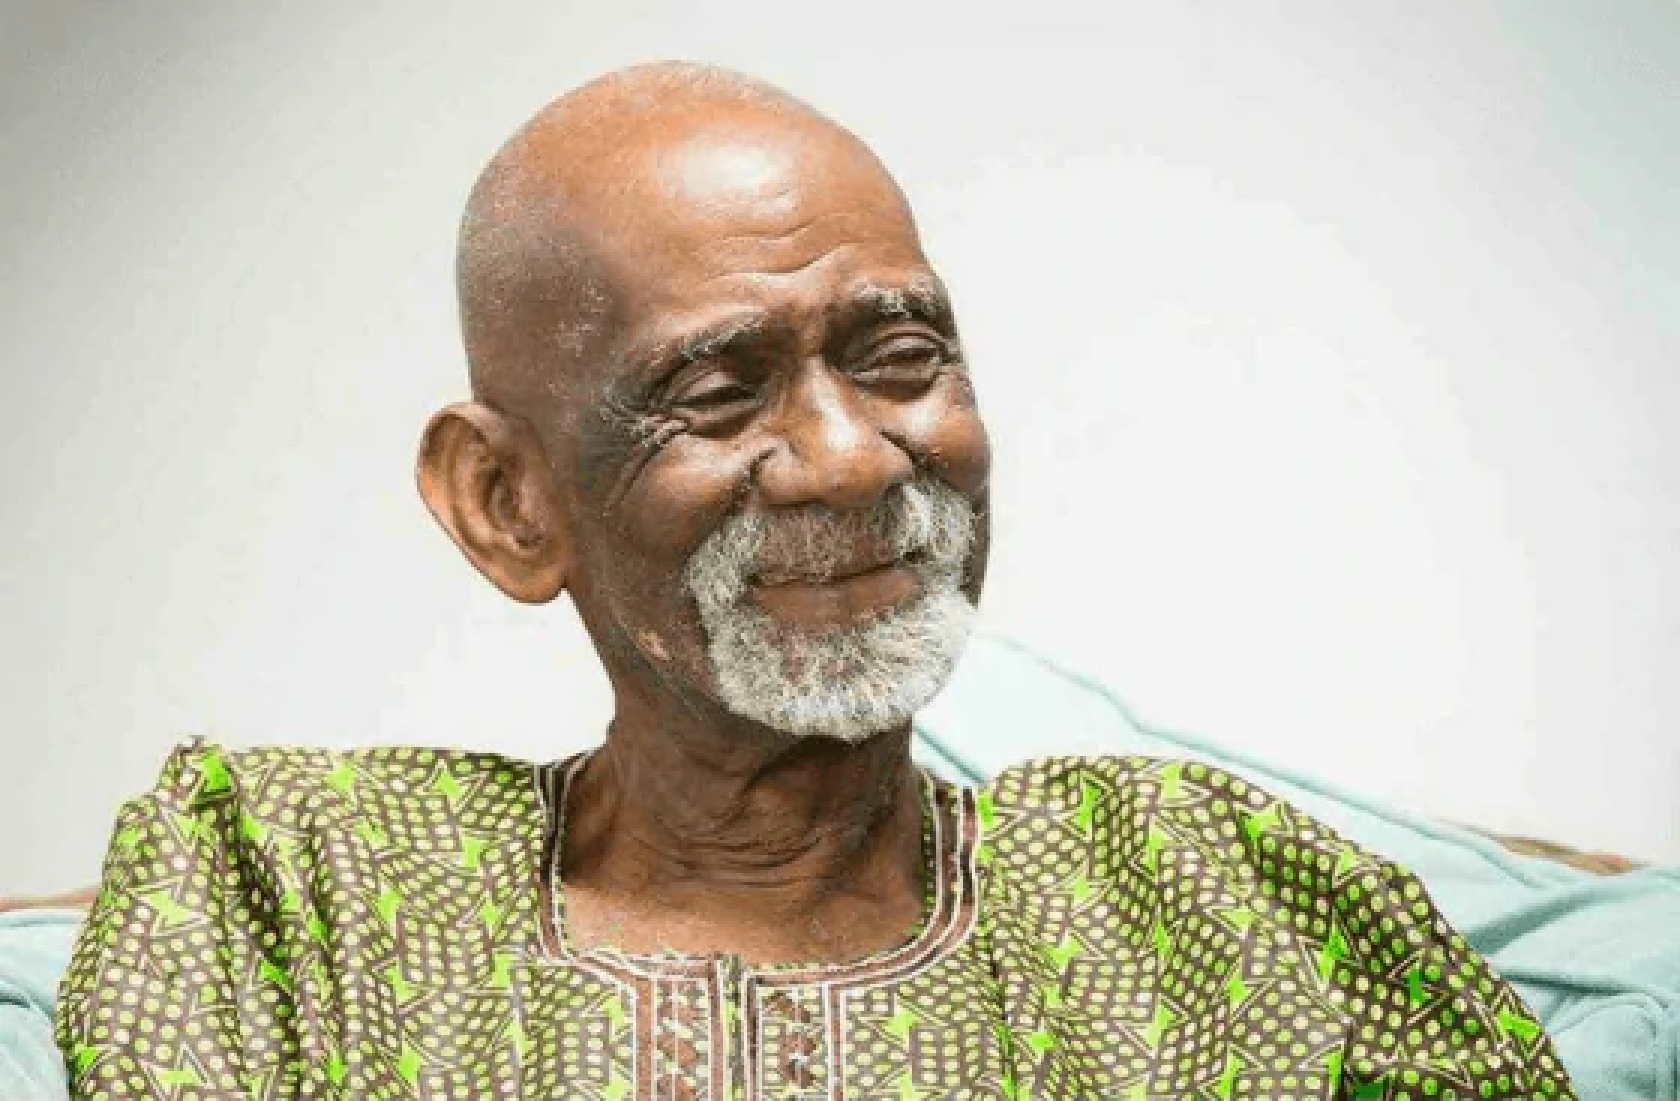 The Biggest Influence on Our Health (February 2021) – Dr. Sebi's Cell Food - Dr. Sebi's Cell Food